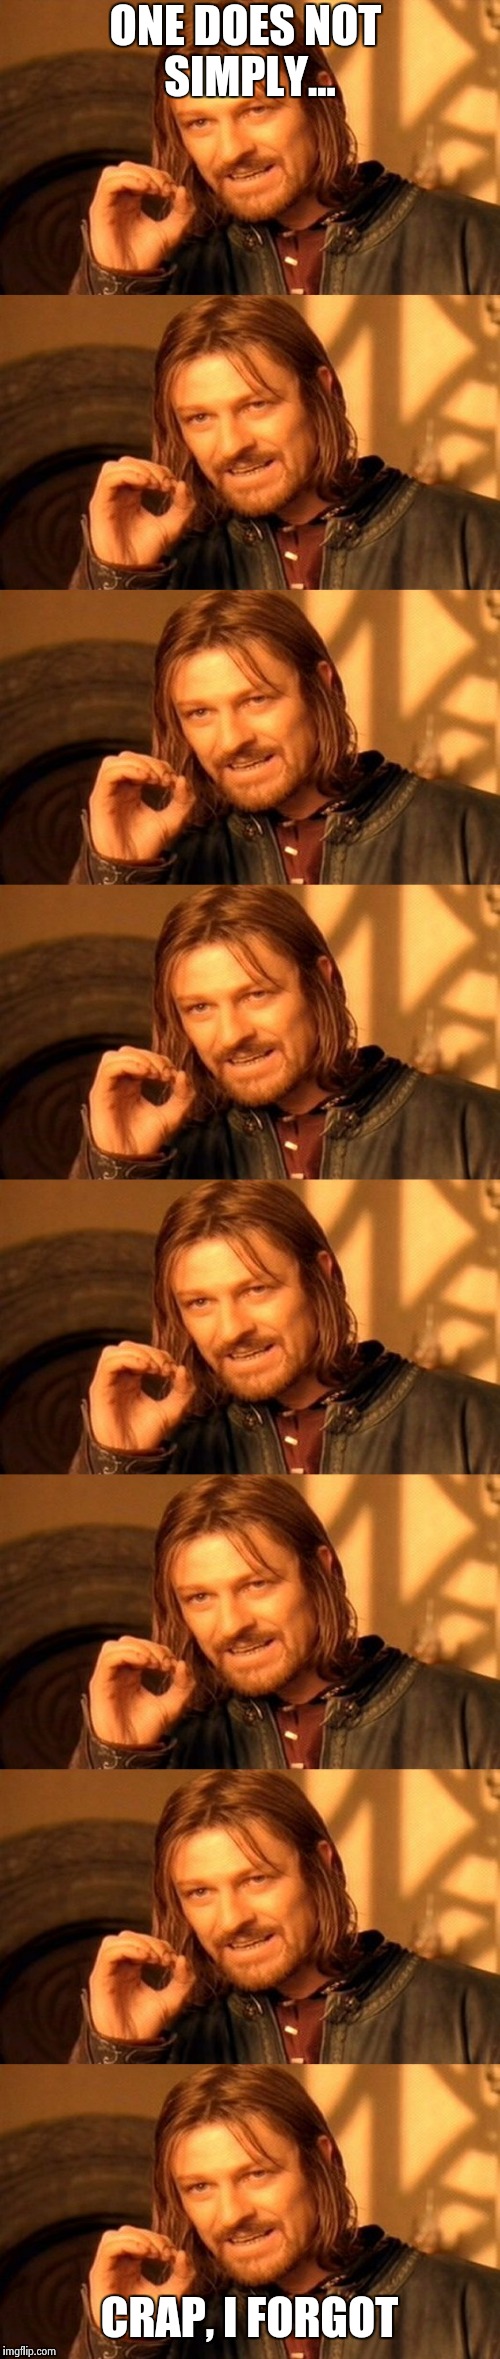 One Does Not Simply... | ONE DOES NOT SIMPLY... CRAP, I FORGOT | image tagged in one does not simply,crap | made w/ Imgflip meme maker